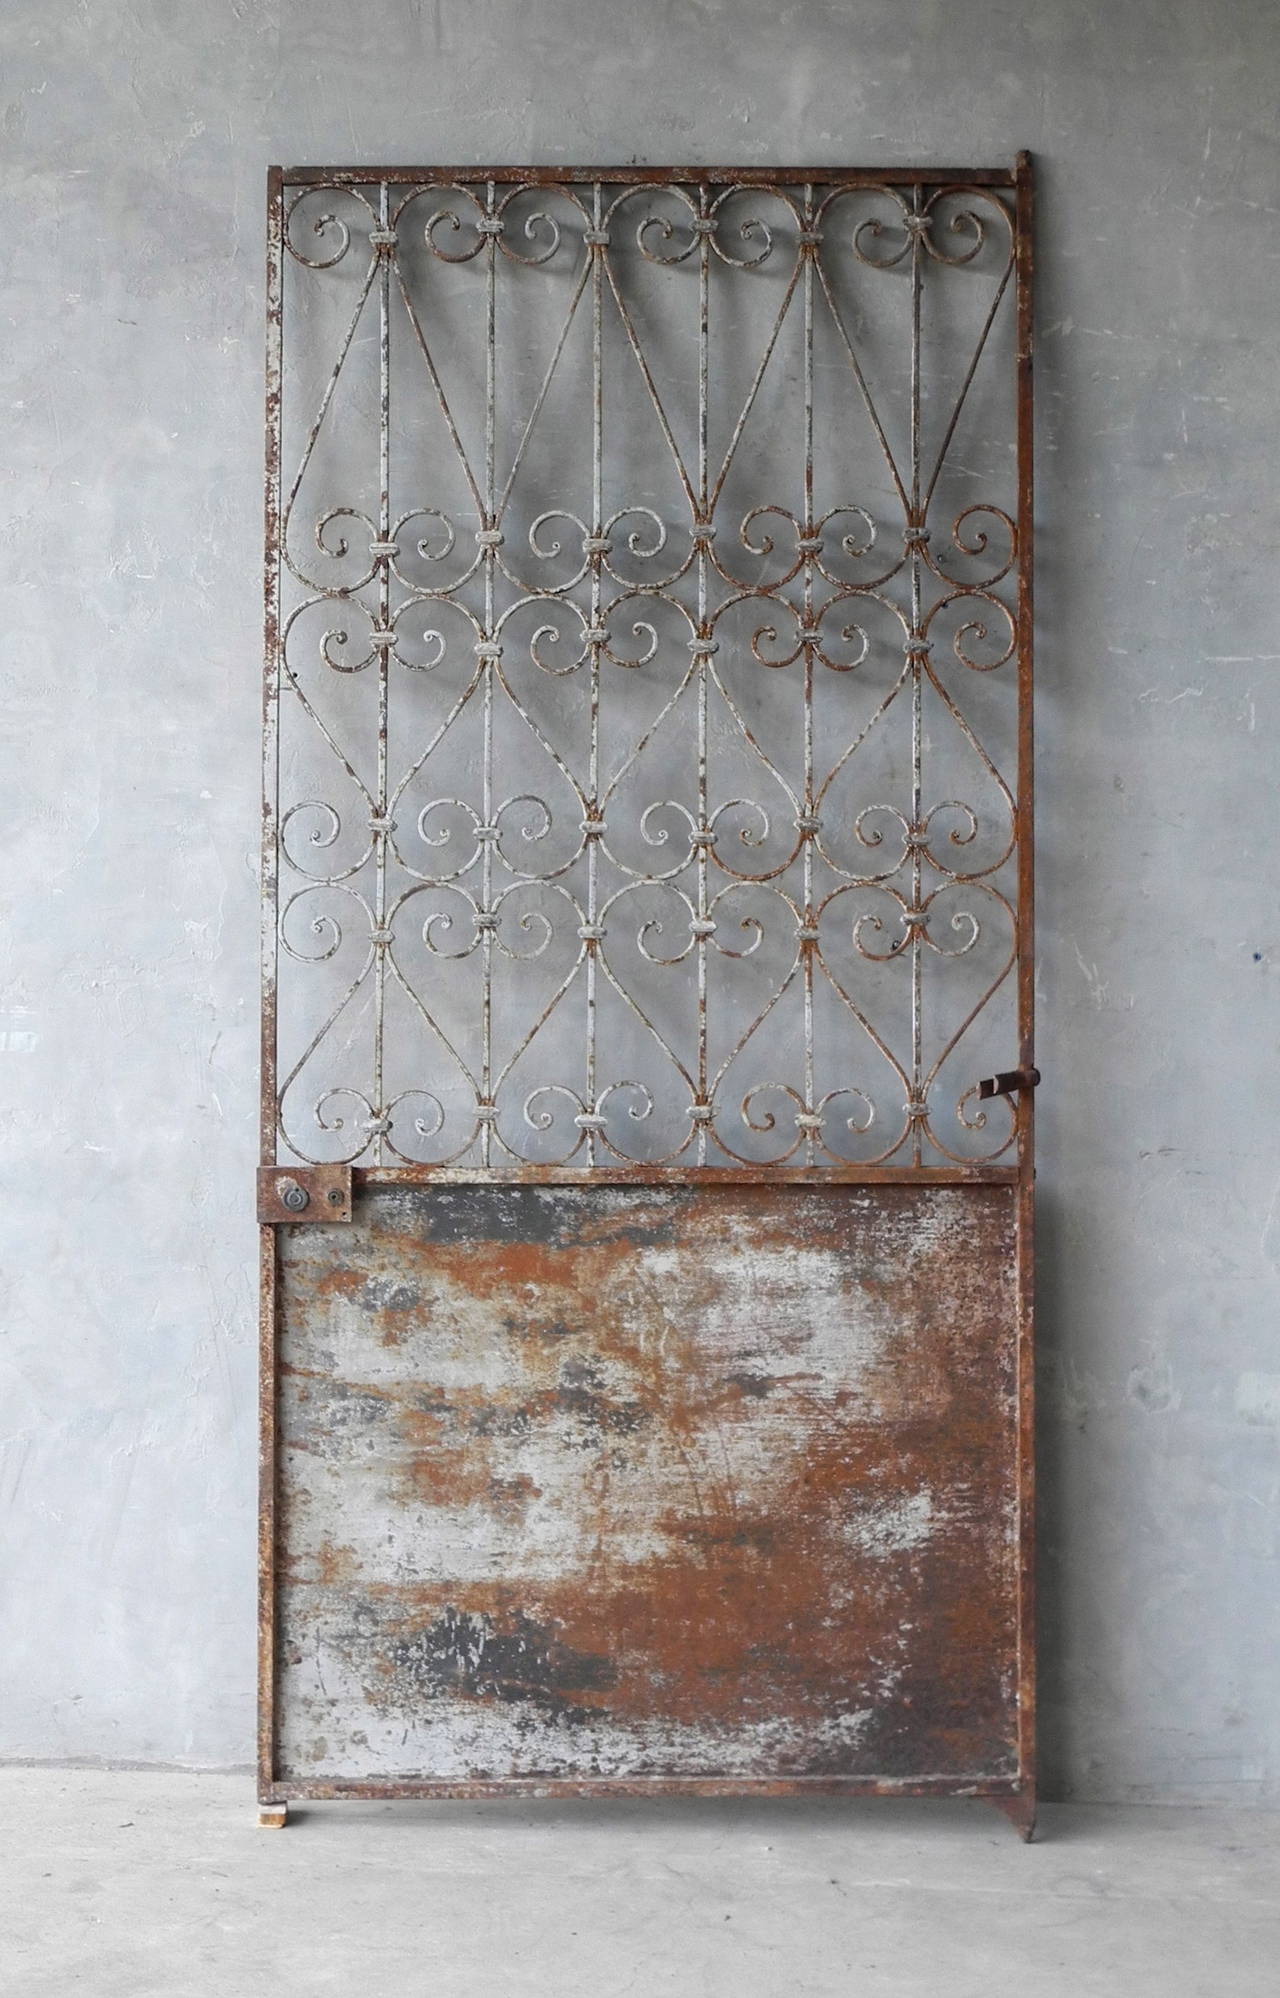 This antique single gate originally served as the entry way to a provençal garden in France. Its beautiful patina would make this gate a focal point in any outdoor space. The hand-hammered lattice work up top is both decorative and classic while